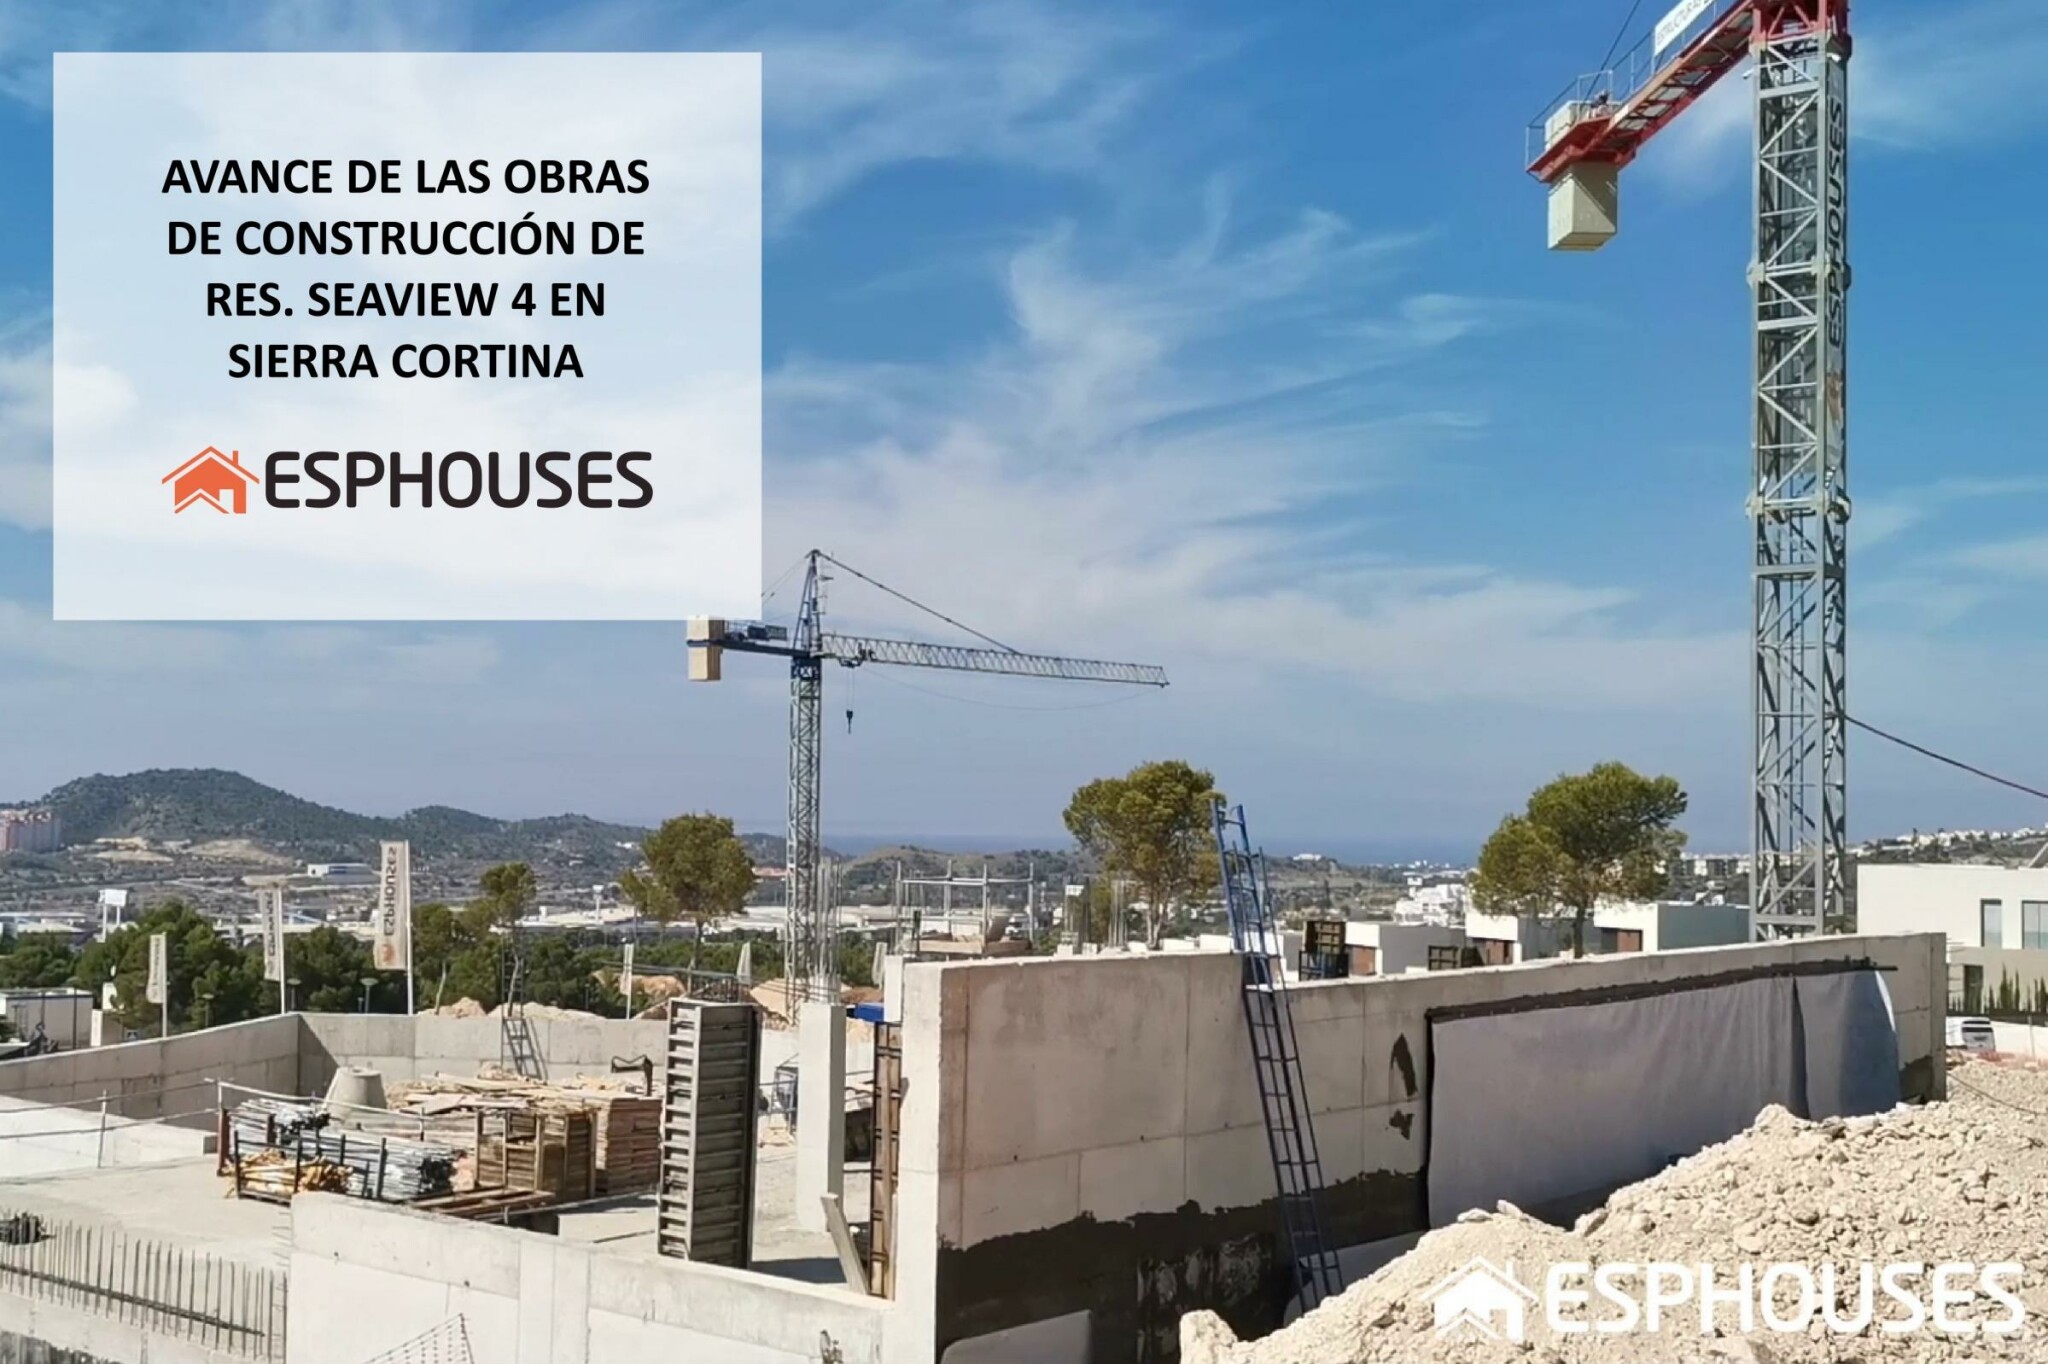 Progress of the construction works of the villas of Res. SEAVIEW 4 in Sierra Cortina